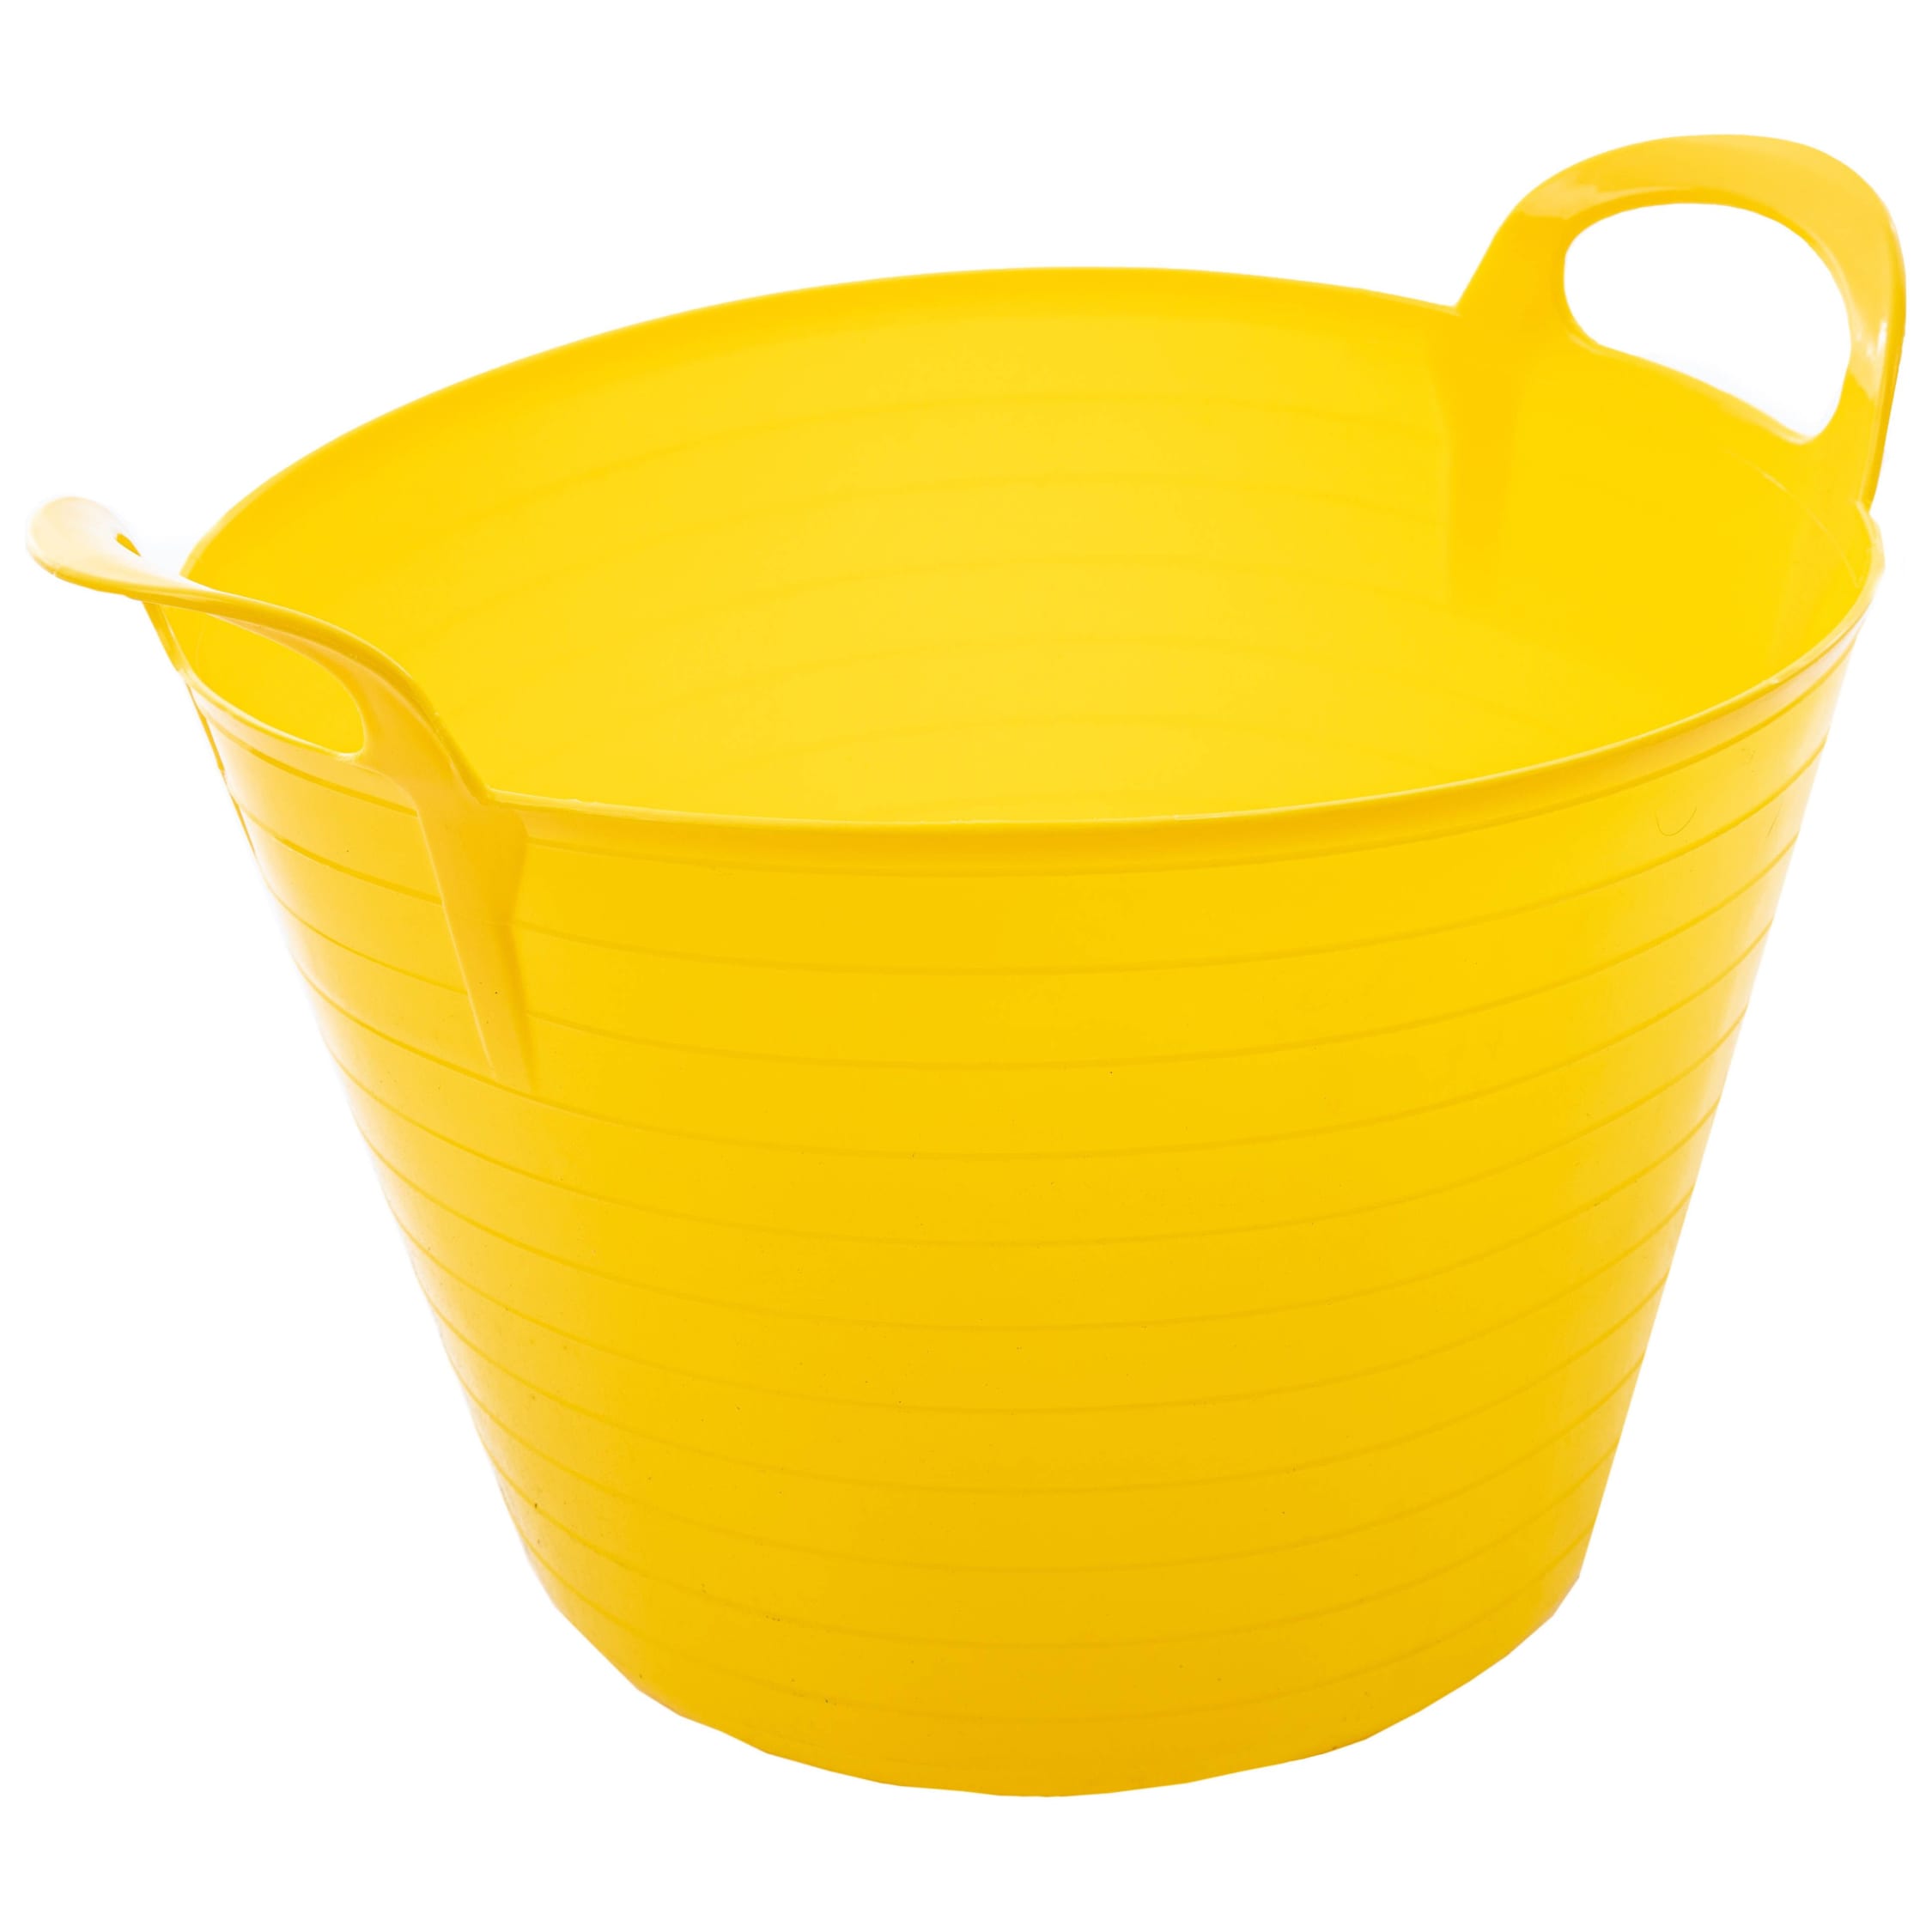 42 Litre Large Flexi Tub Garden Home Flexible Container Bucket MADE IN U.K. 